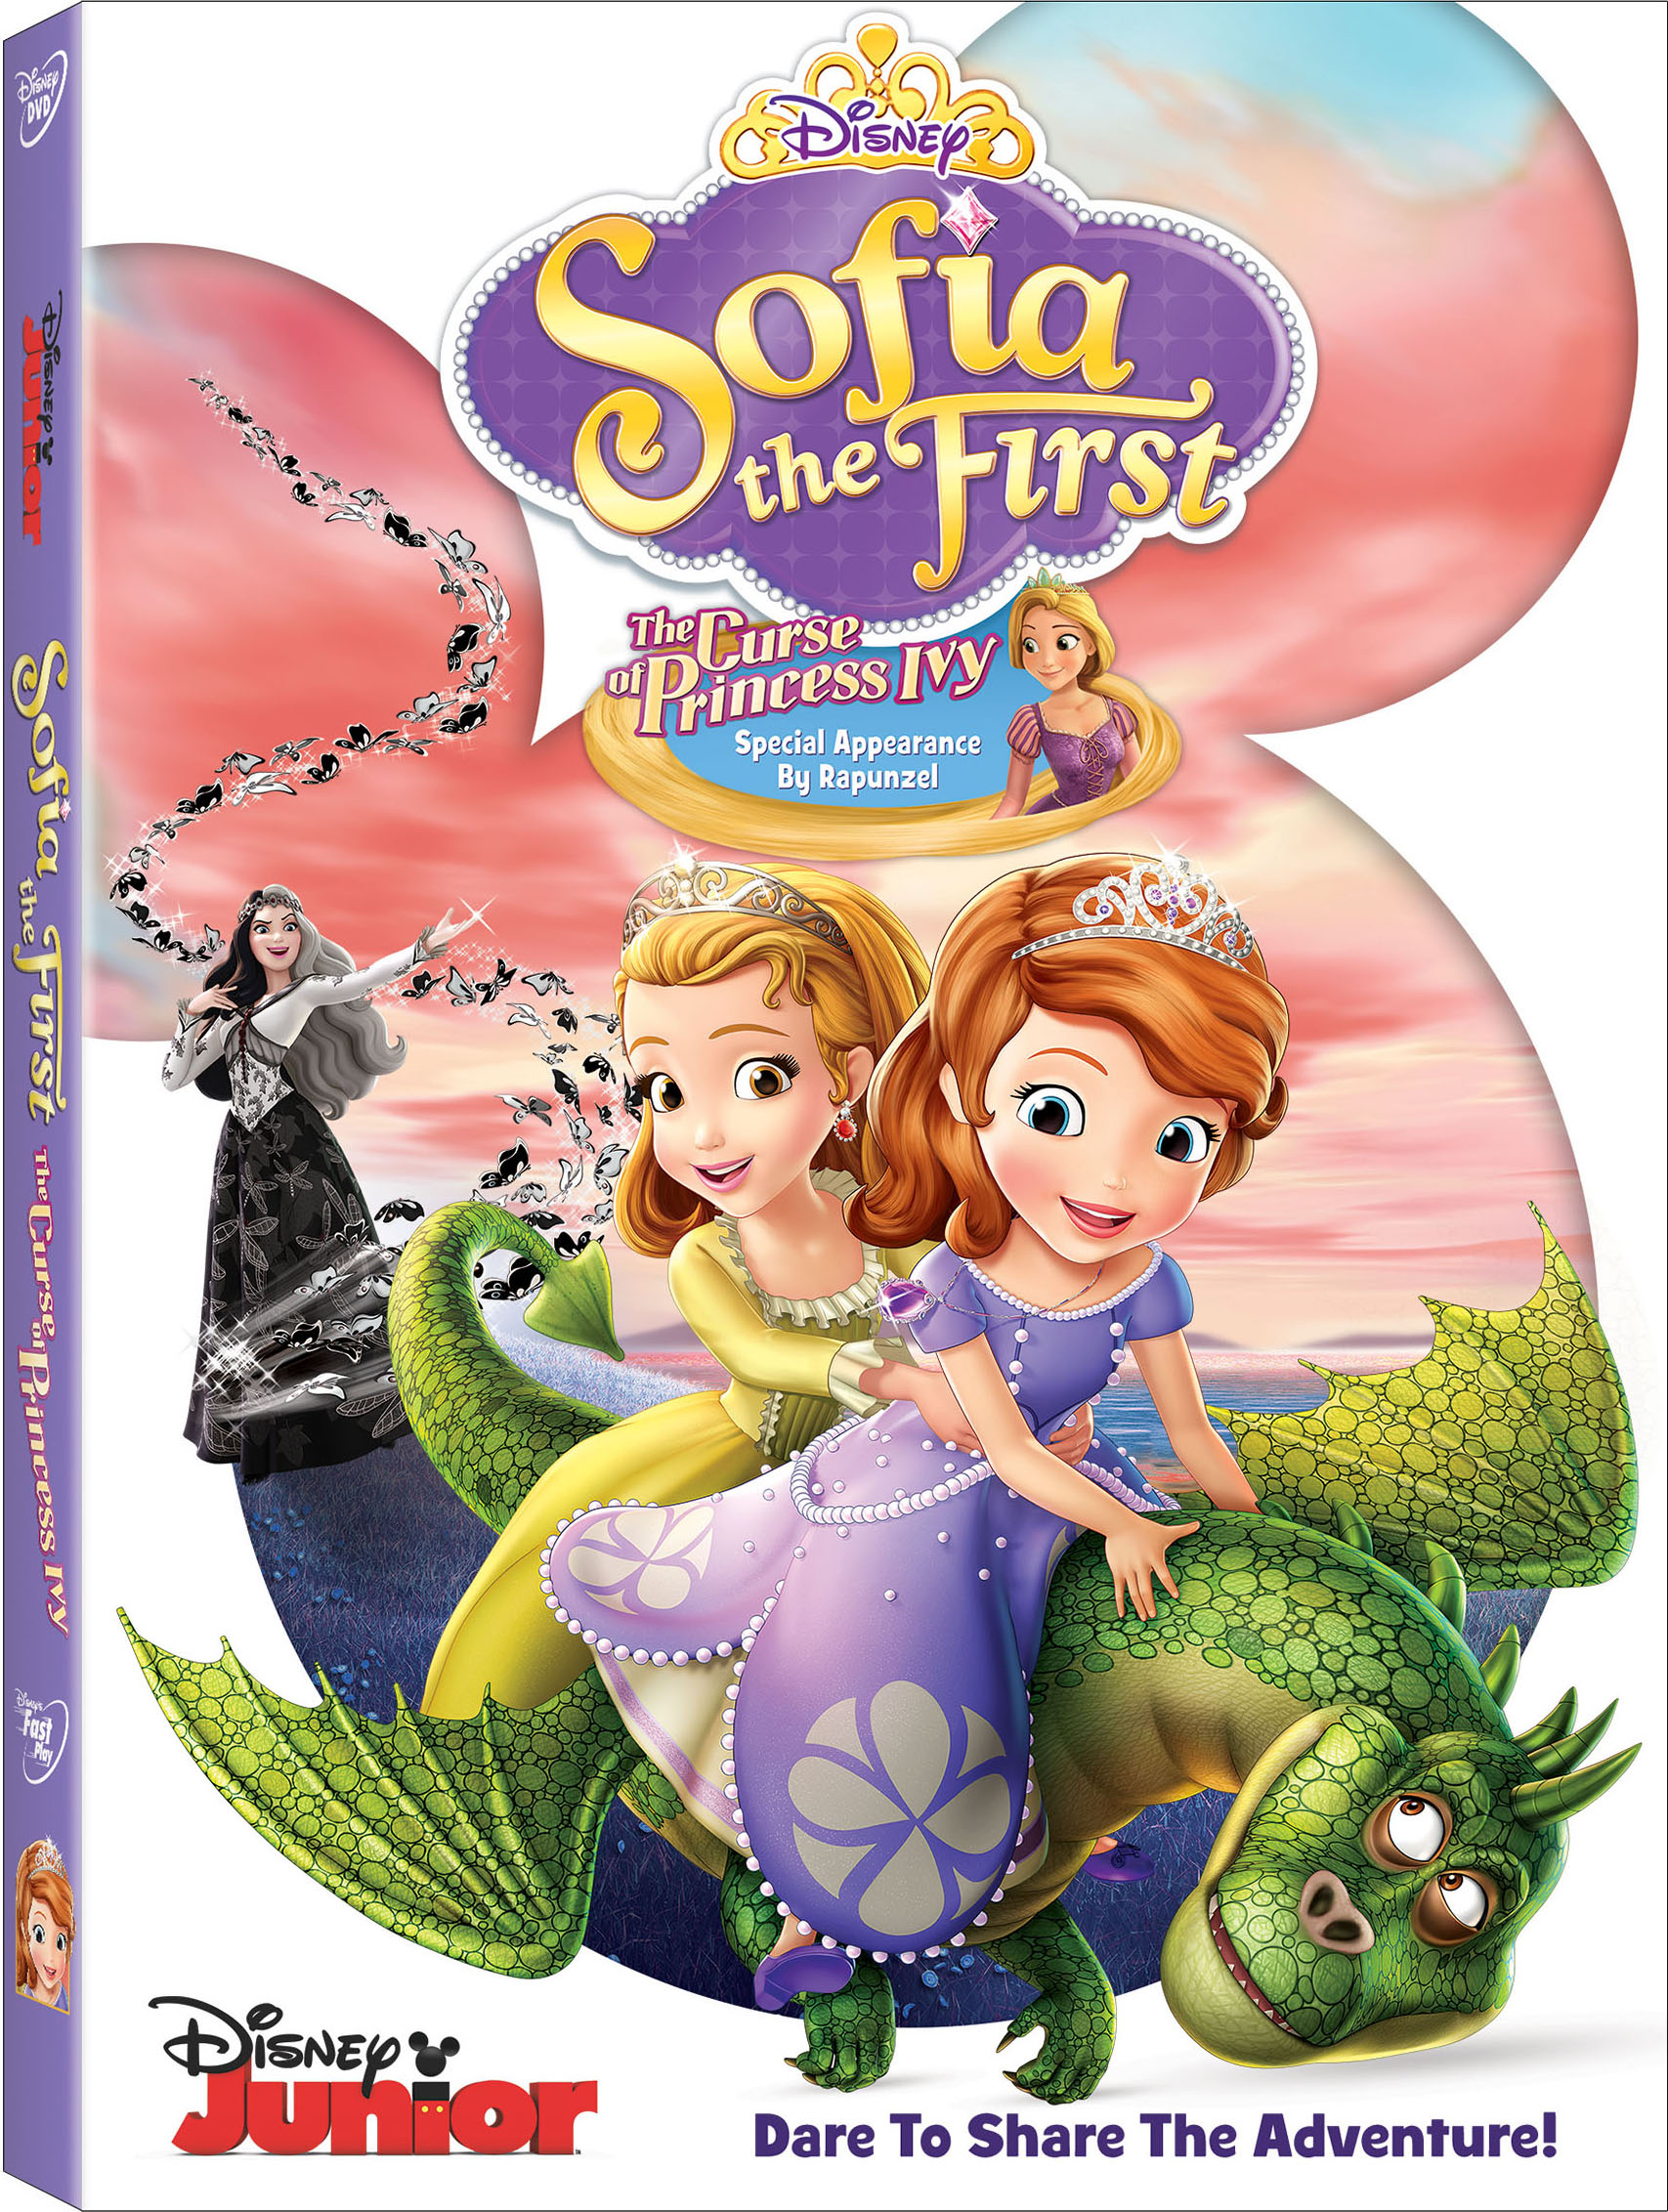 Review of Sofia the First: The Curse of Princess Ivy DVD